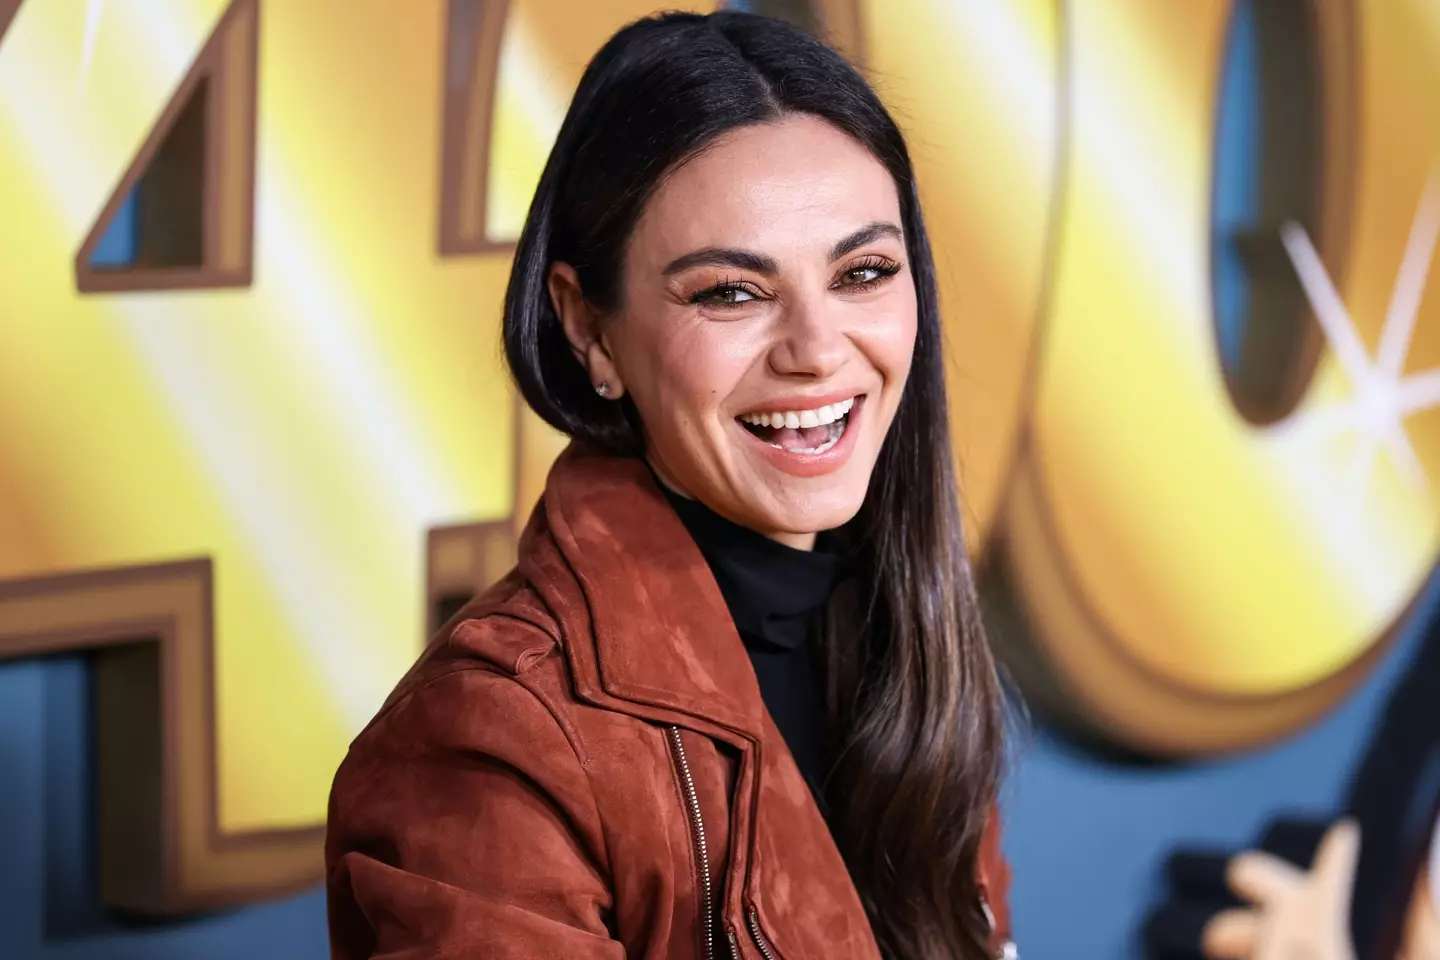 Mila Kunis celebrated the 400th episode of Family Guy this month.